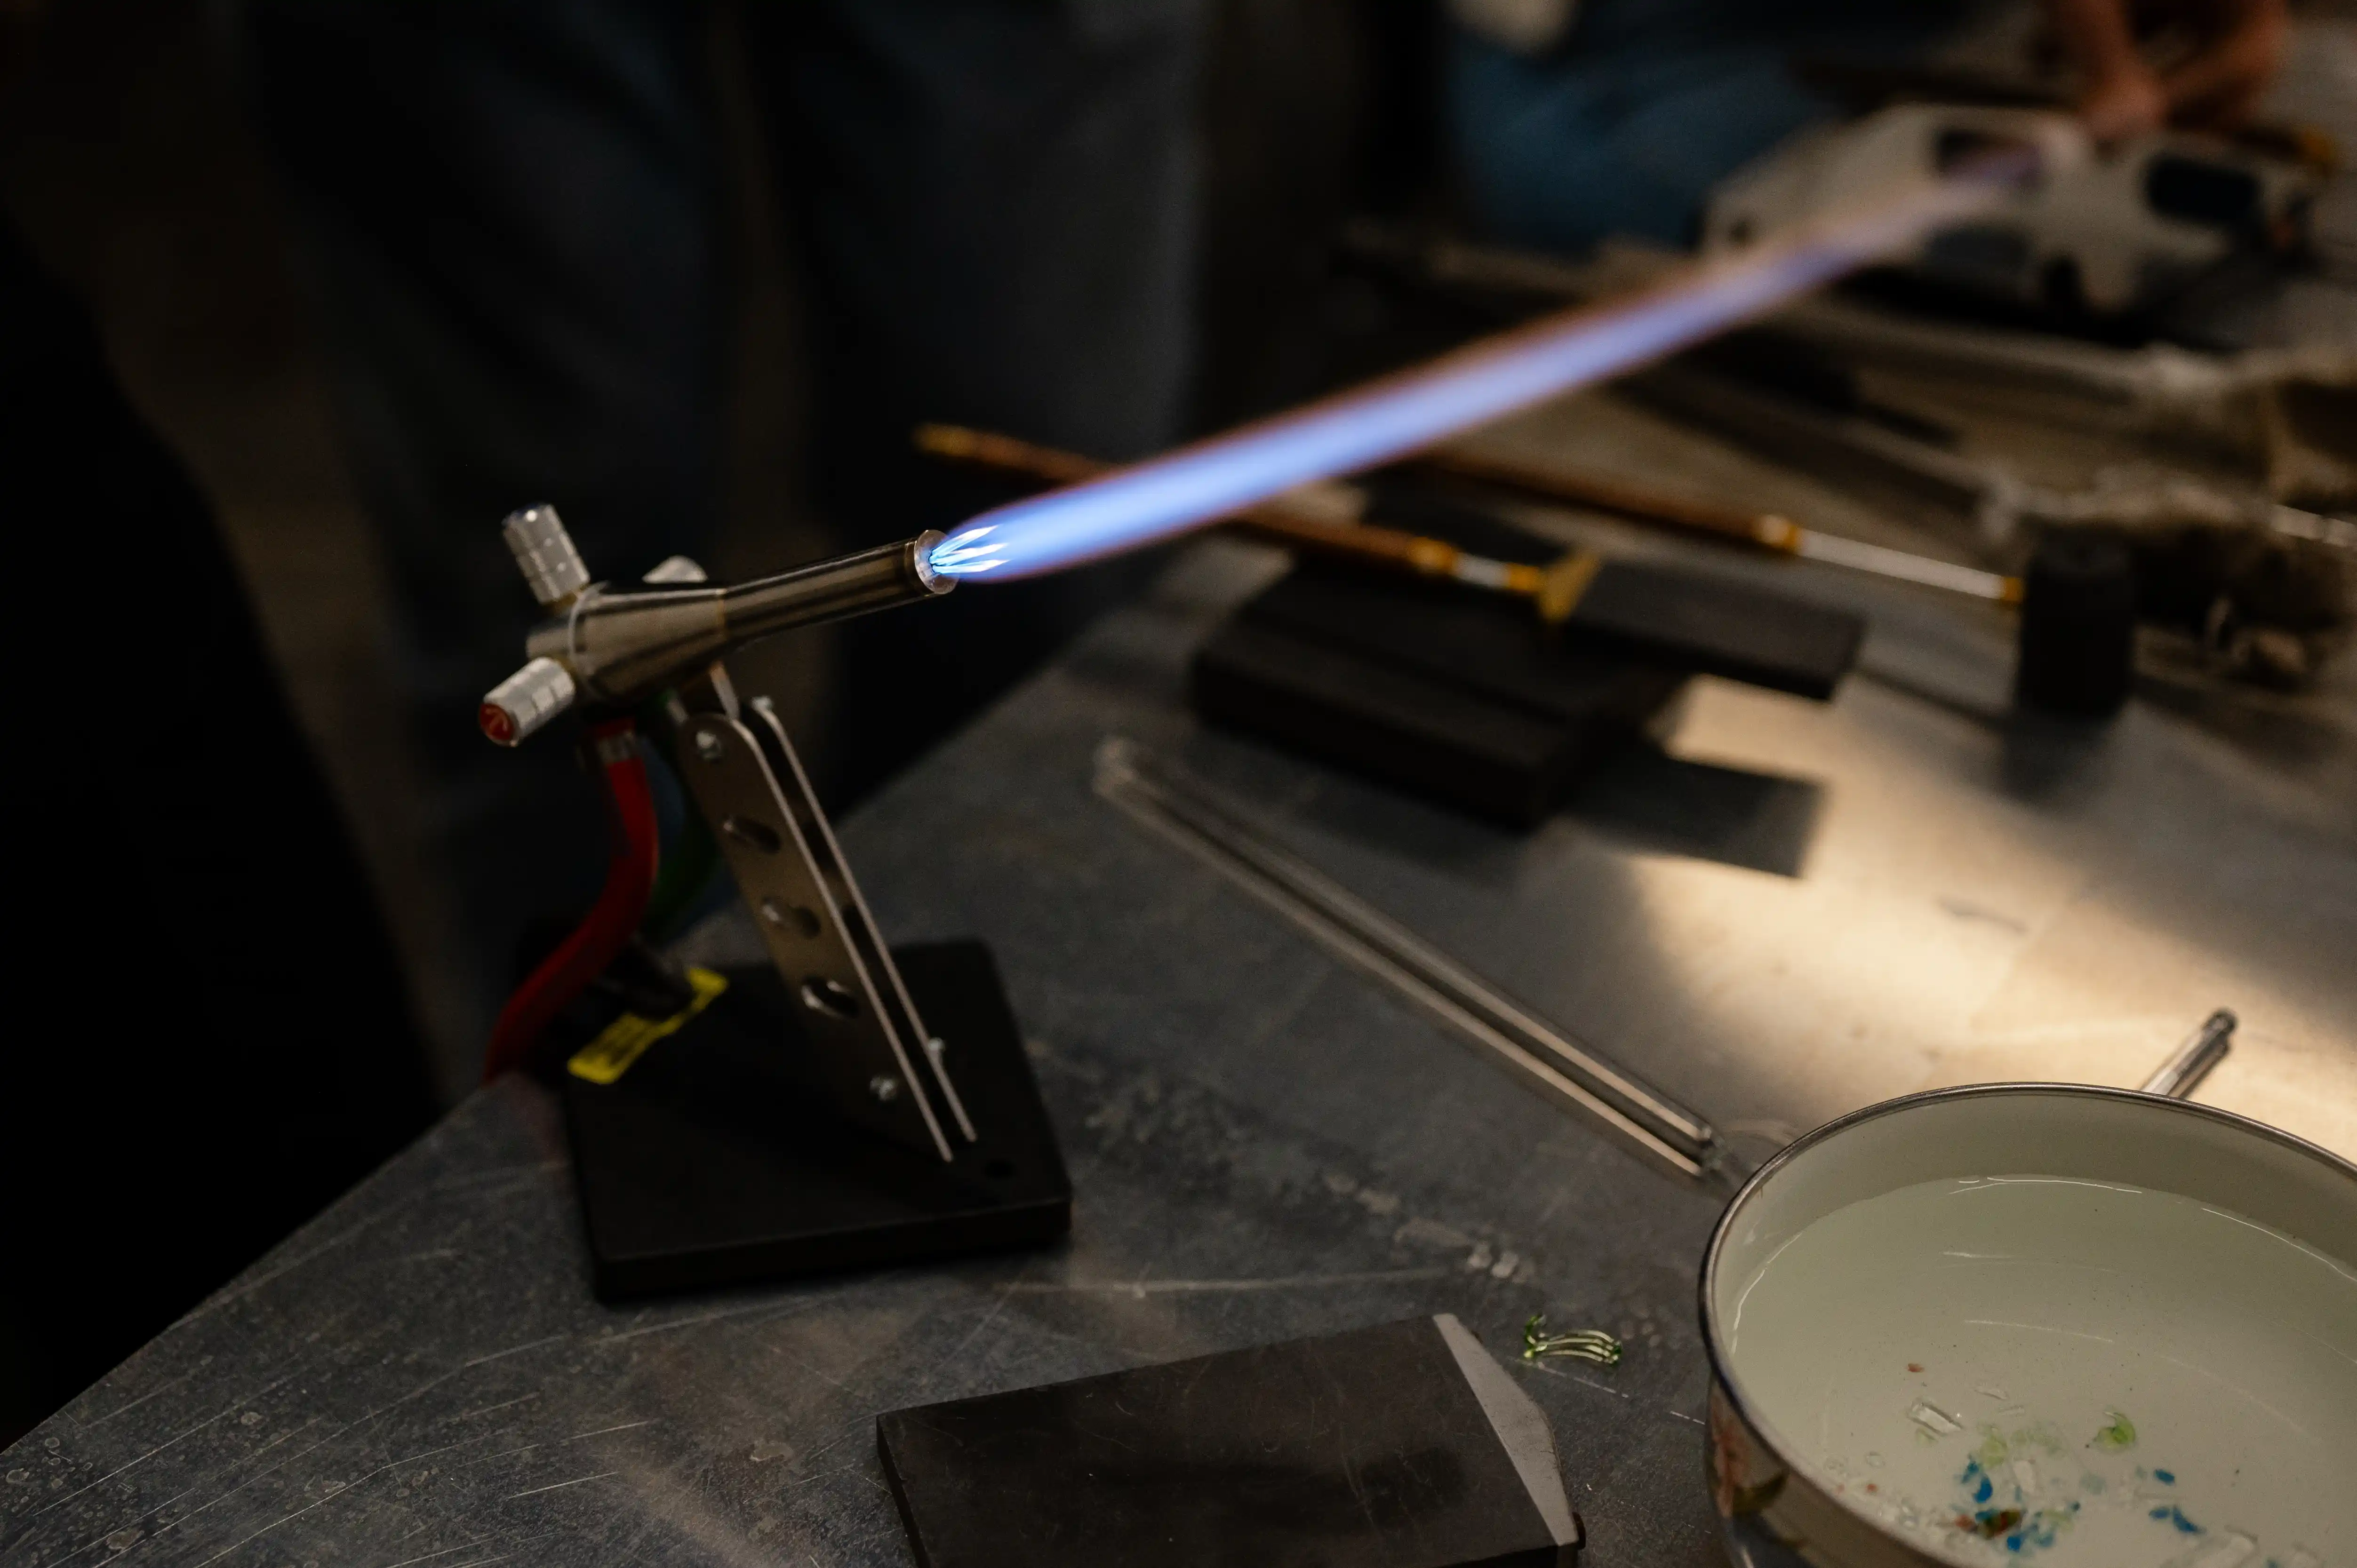 A gas torch with a blue flame mounted on a stand on a workbench, with glassworking tools and materials in the background.